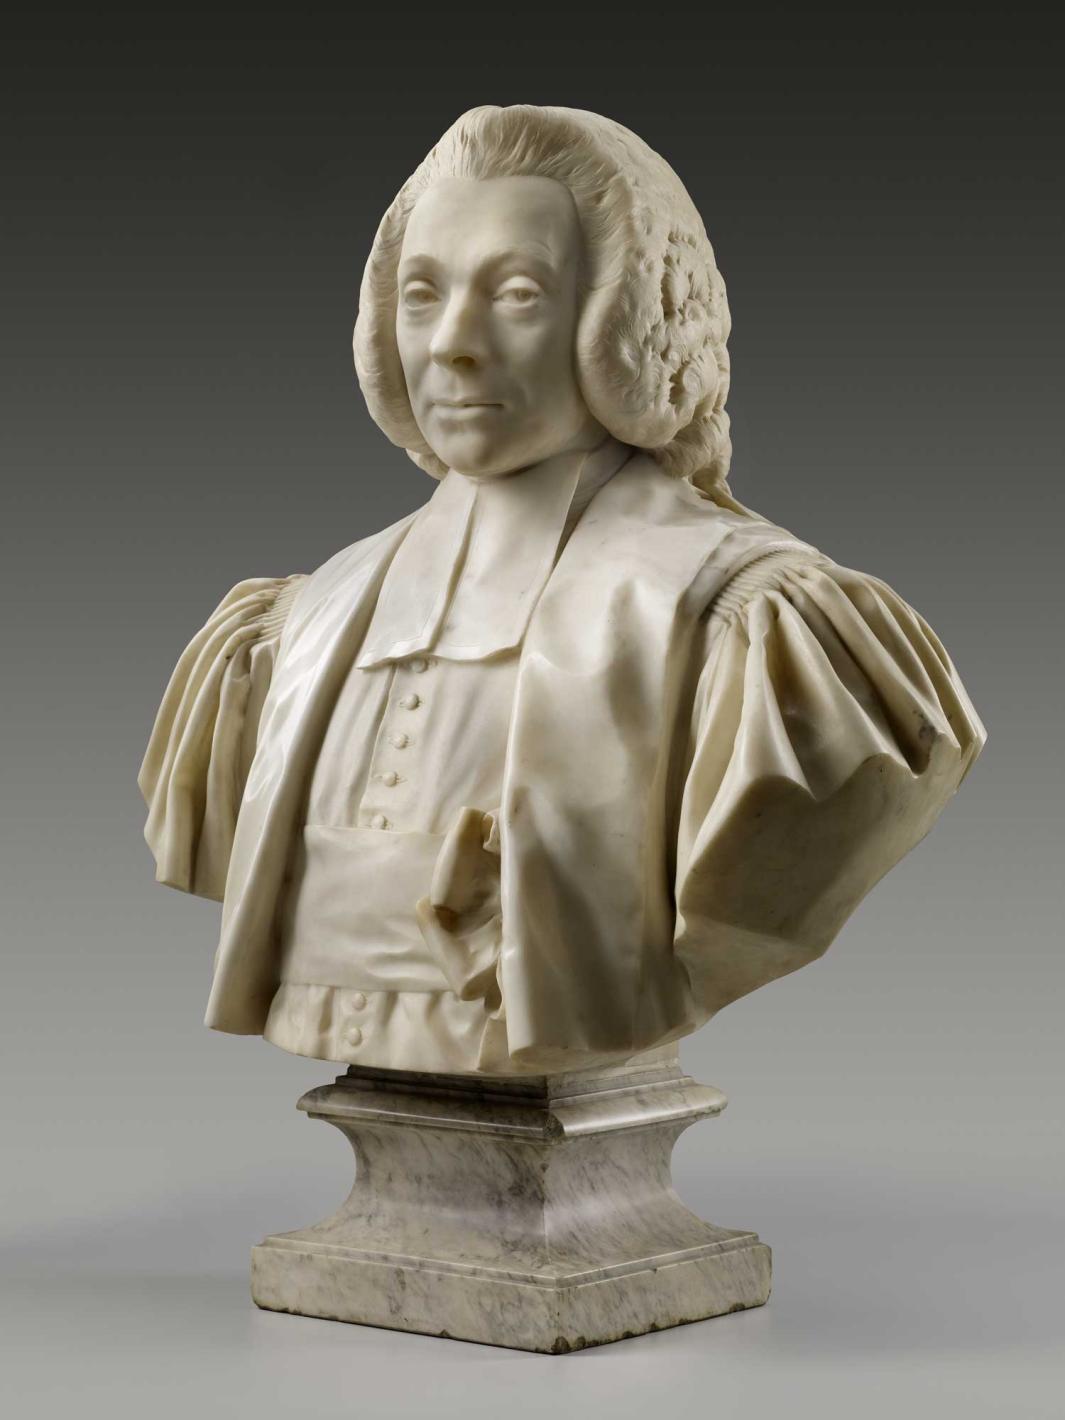 Alternate view of a marble bust of a man wearing a wig, robe, and bow-tied sash